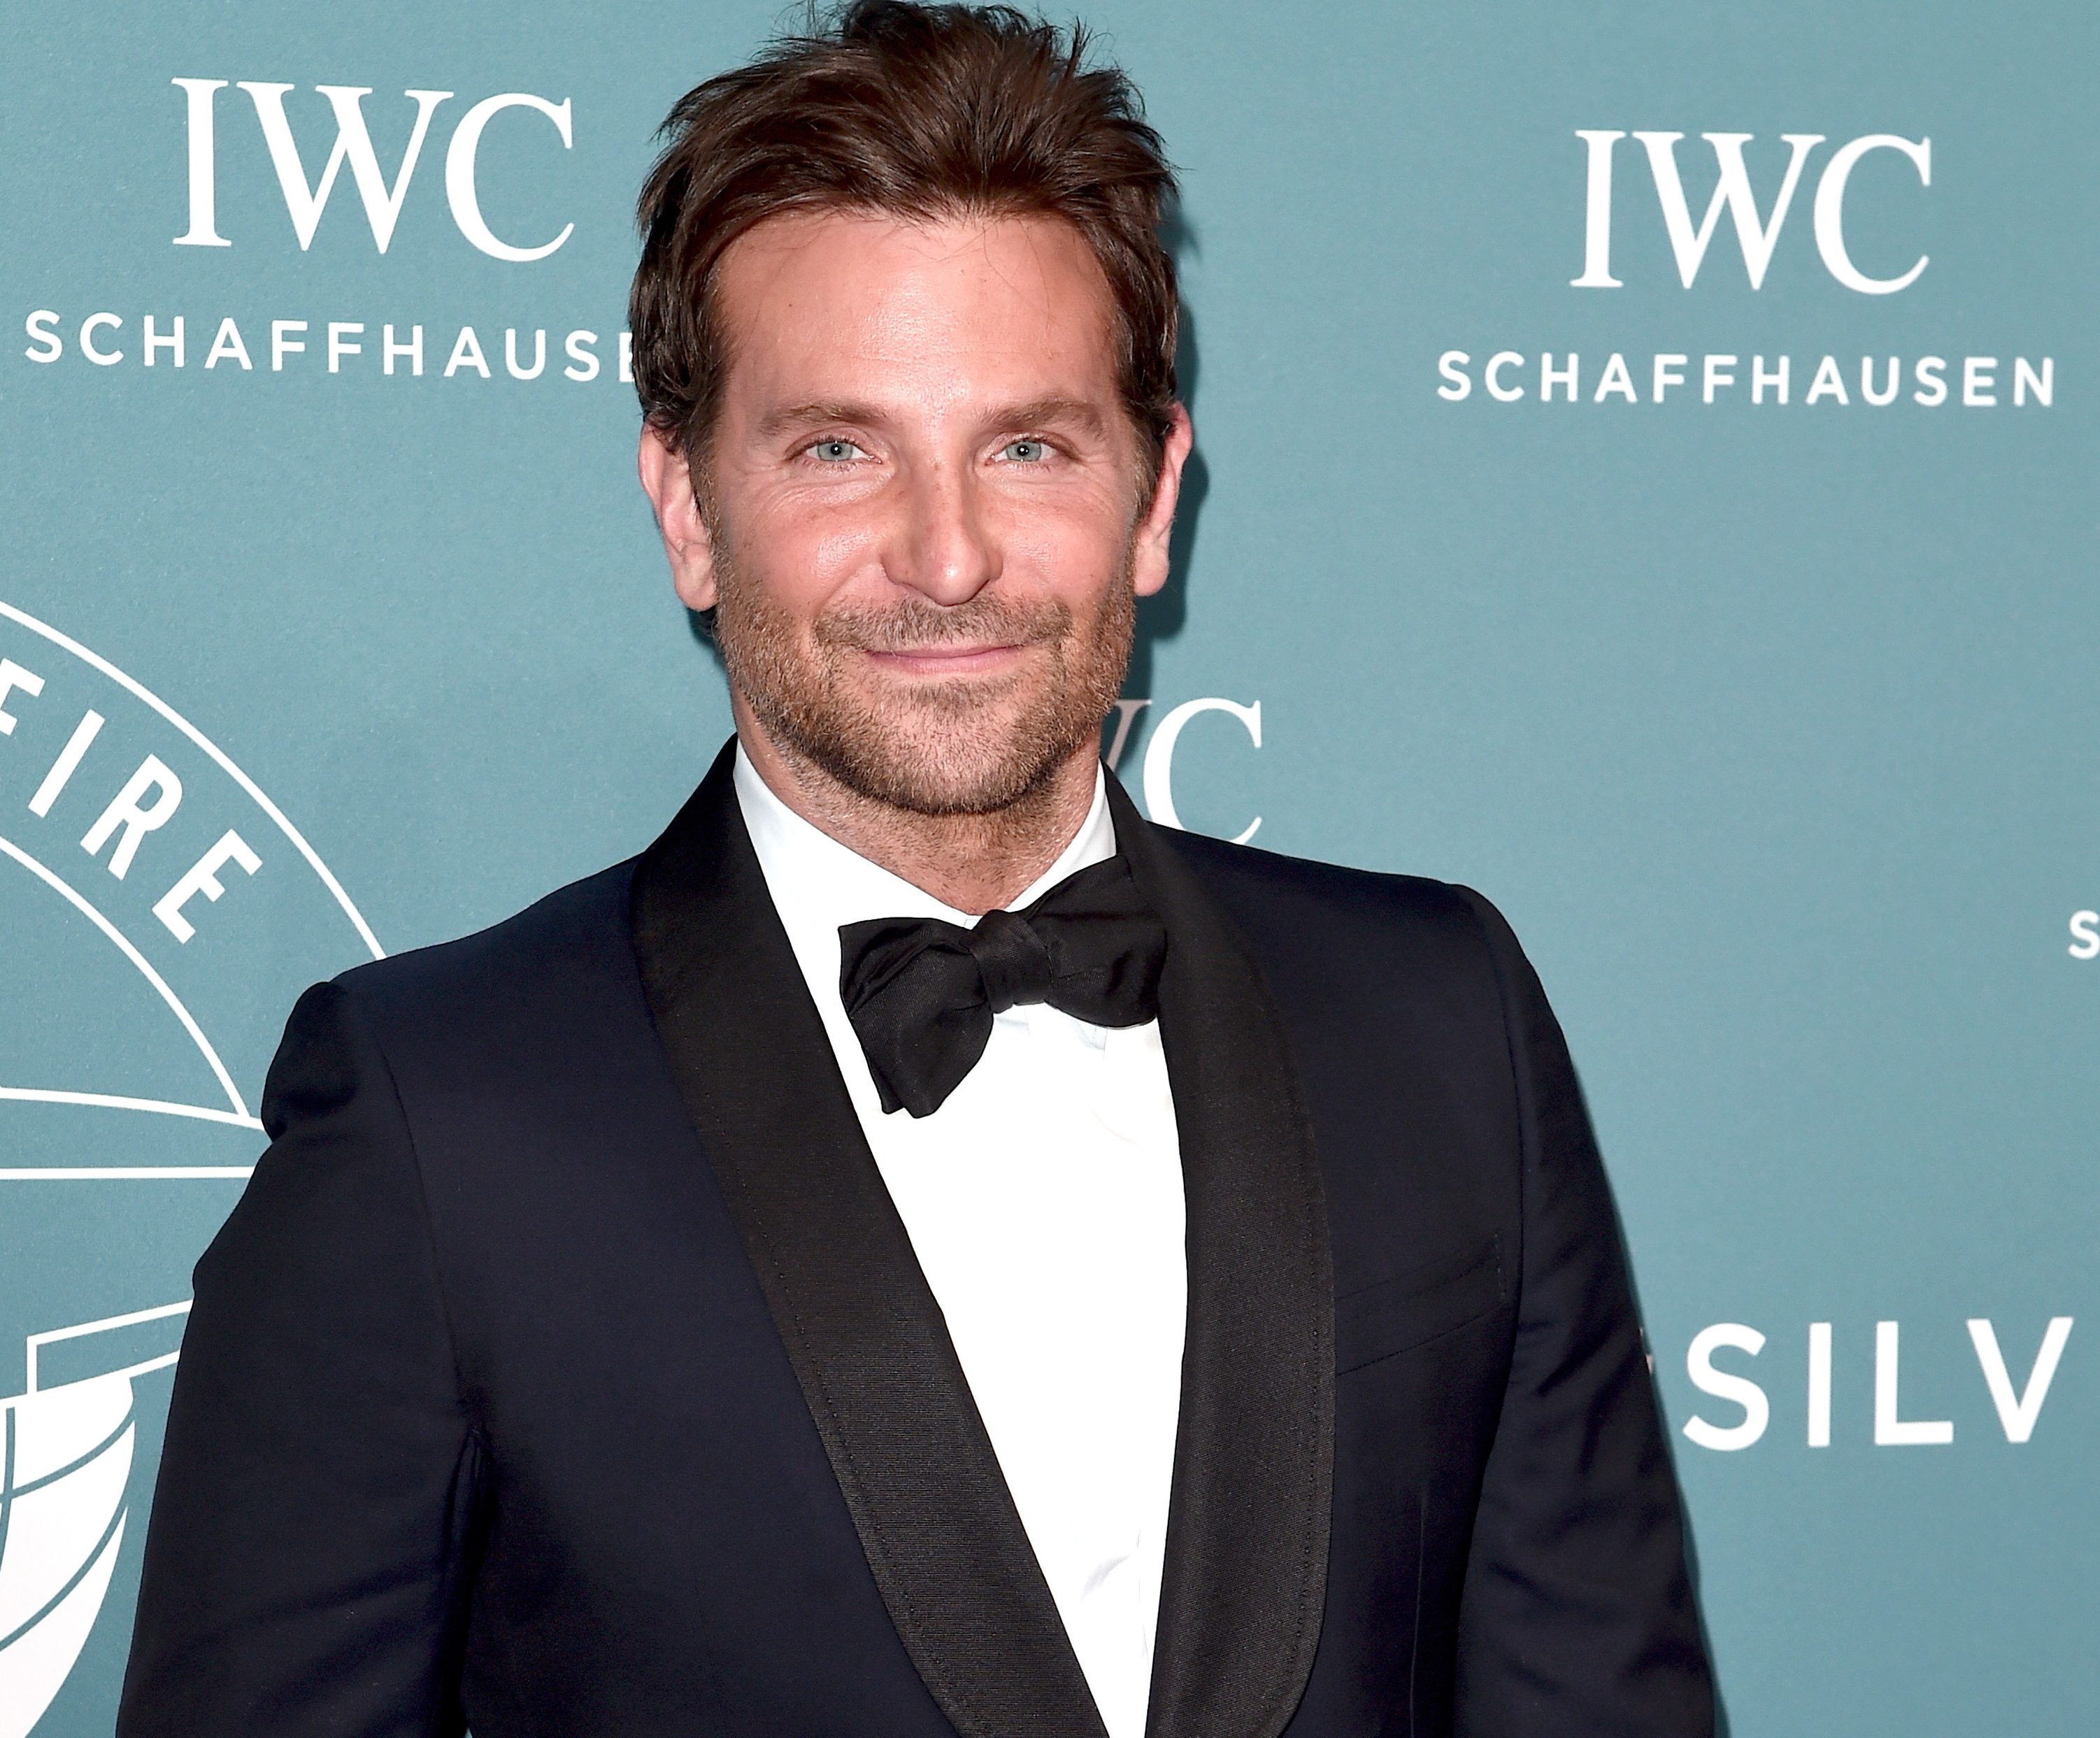 Auctions: Sotheby's Is Selling The Unique IWC Big Pilot Bradley Cooper Wore  To The 2019 Academy Awards - Hodinkee